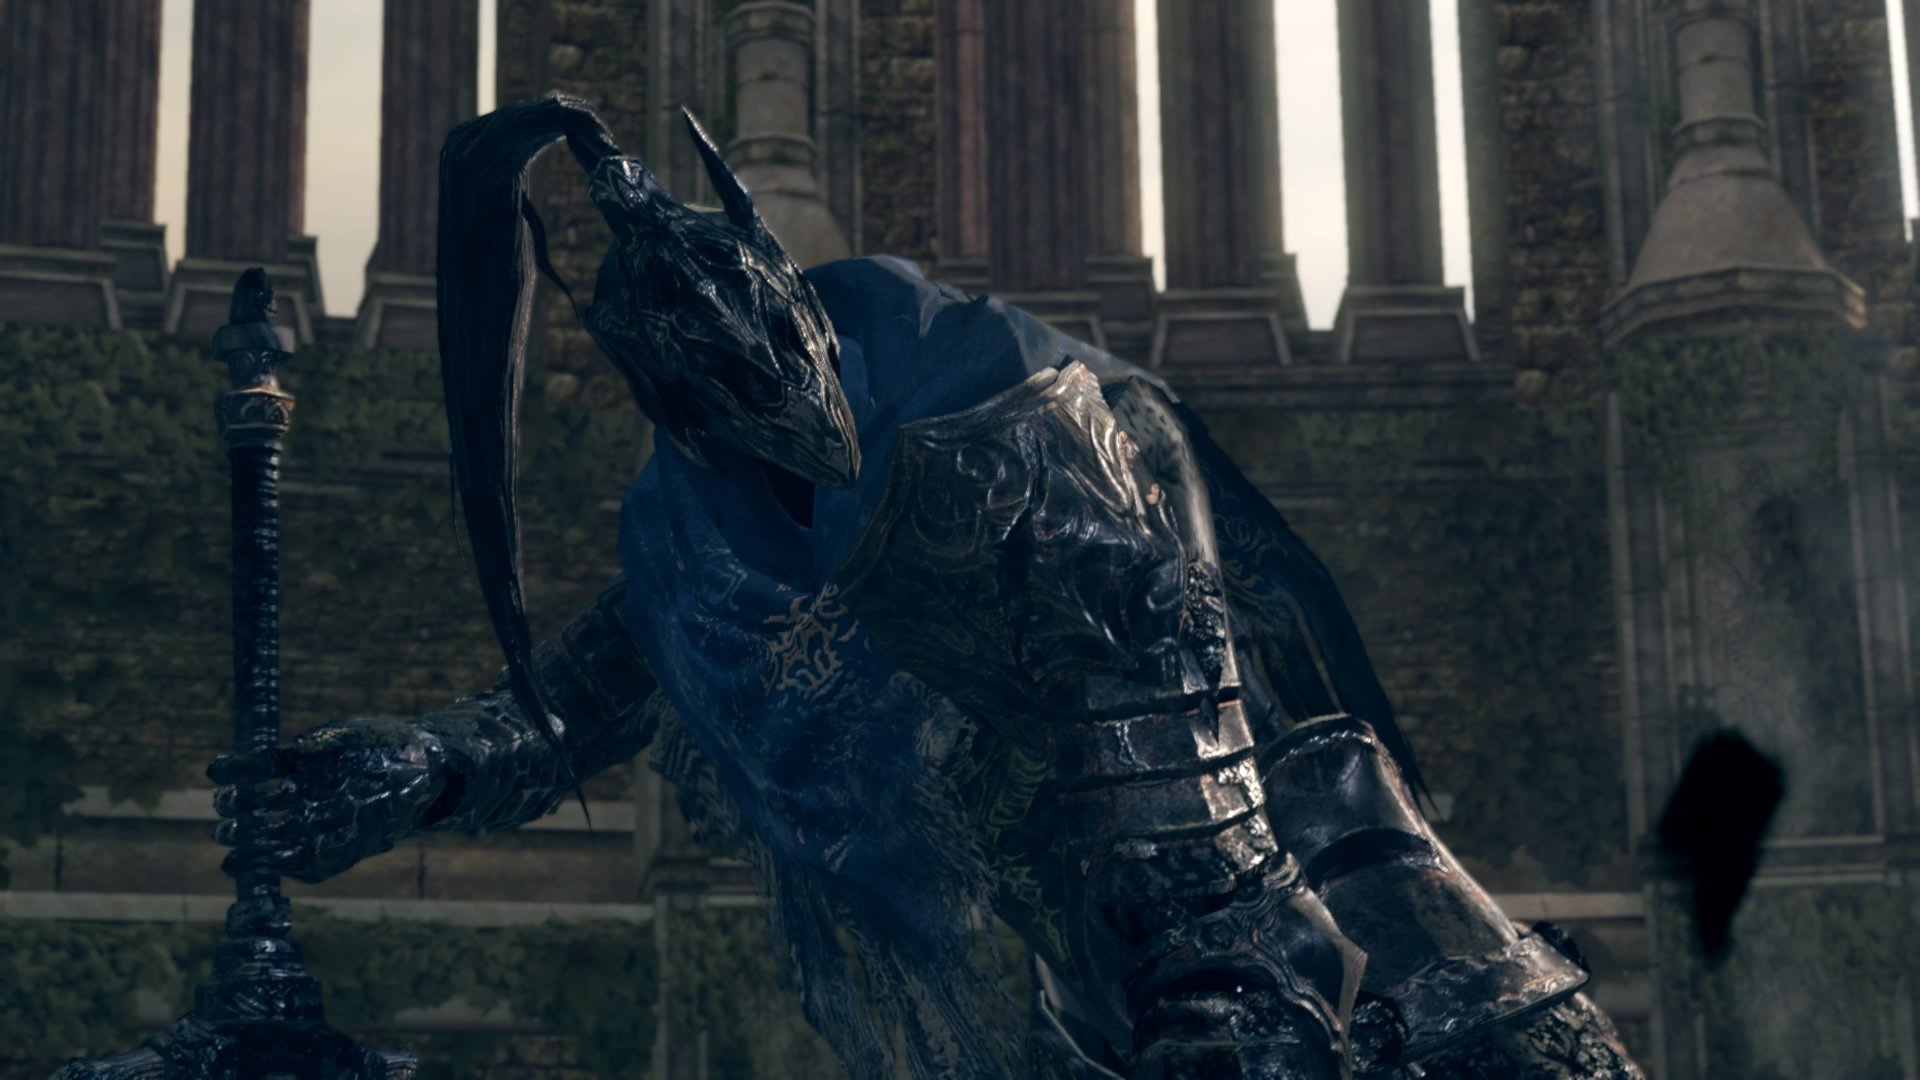 Artorias and the Abyss - Dark Souls